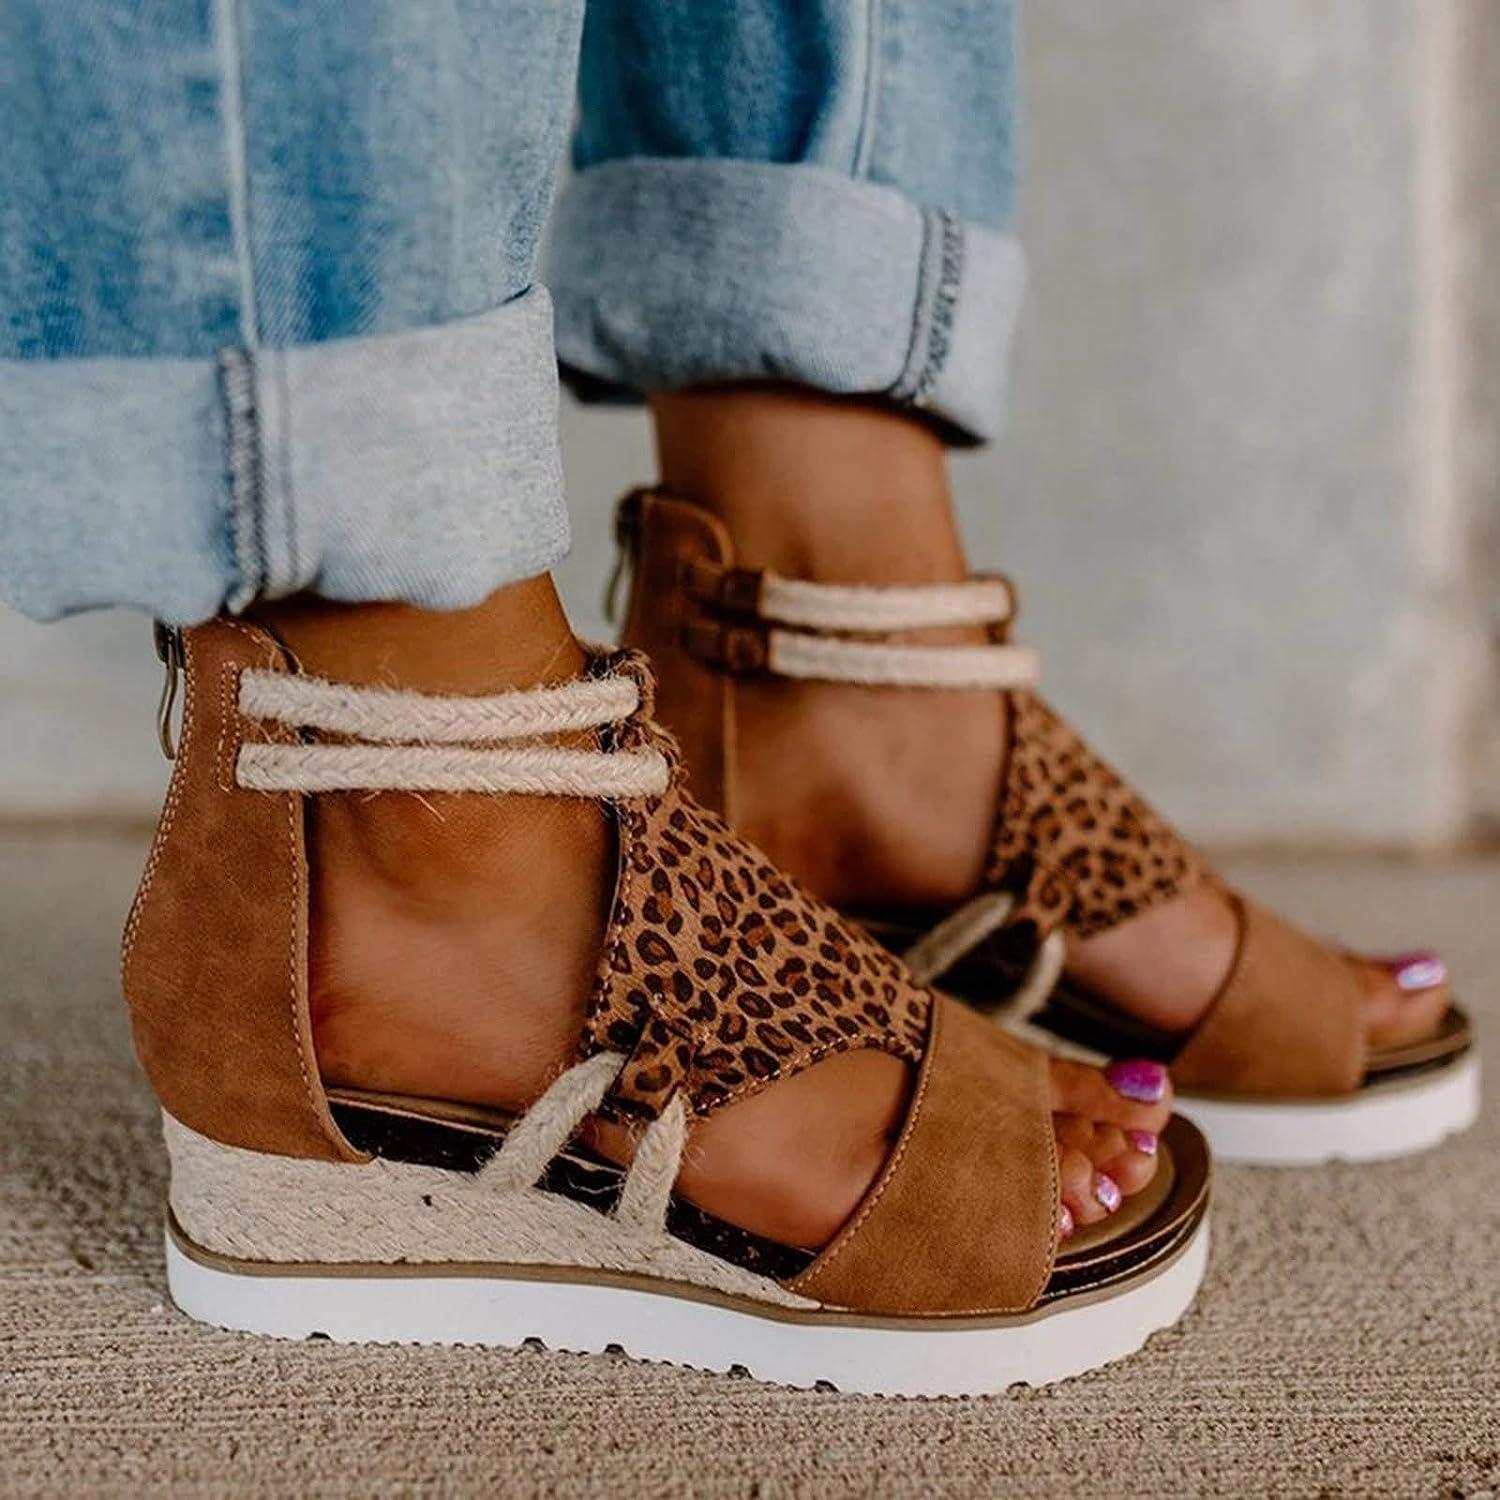 Wedge Sandals for Women Comfy Platform Summer Shoes Open Toe Ankle Strap  Wedge Sandals Classic Beach Sandals Z04-brown 6